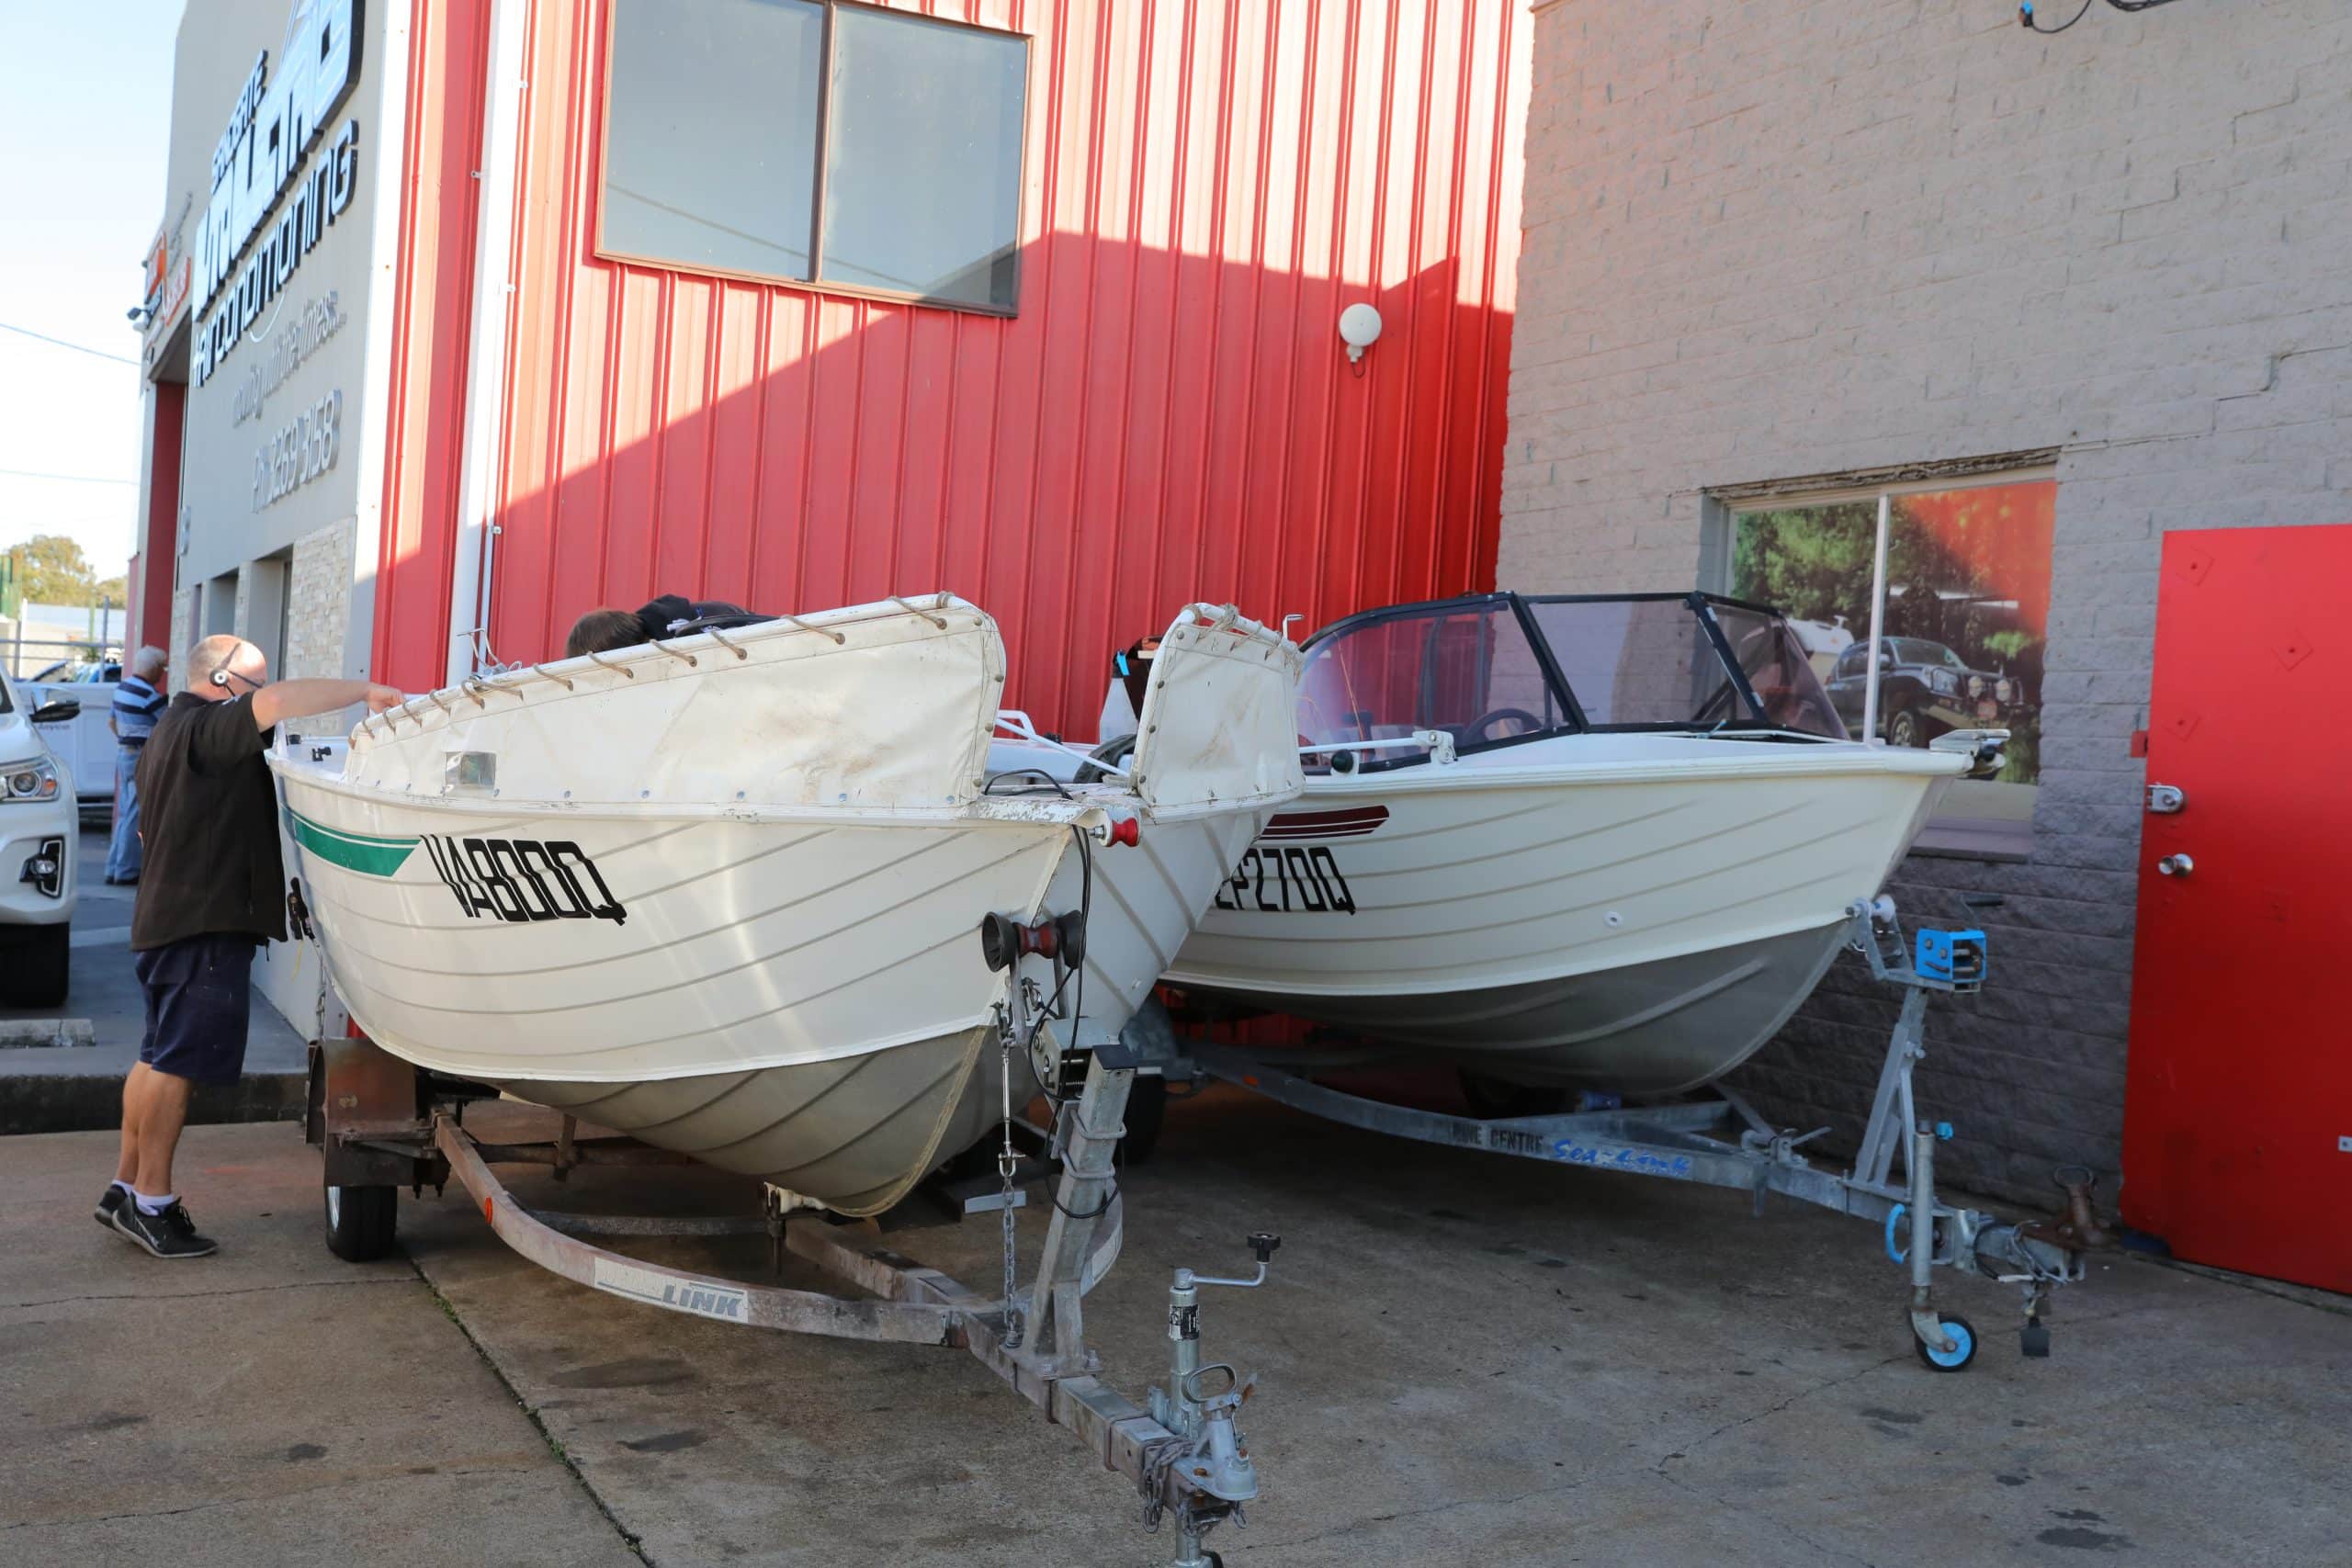 Boats awaiting repairs: Parked outside a repair shop for service